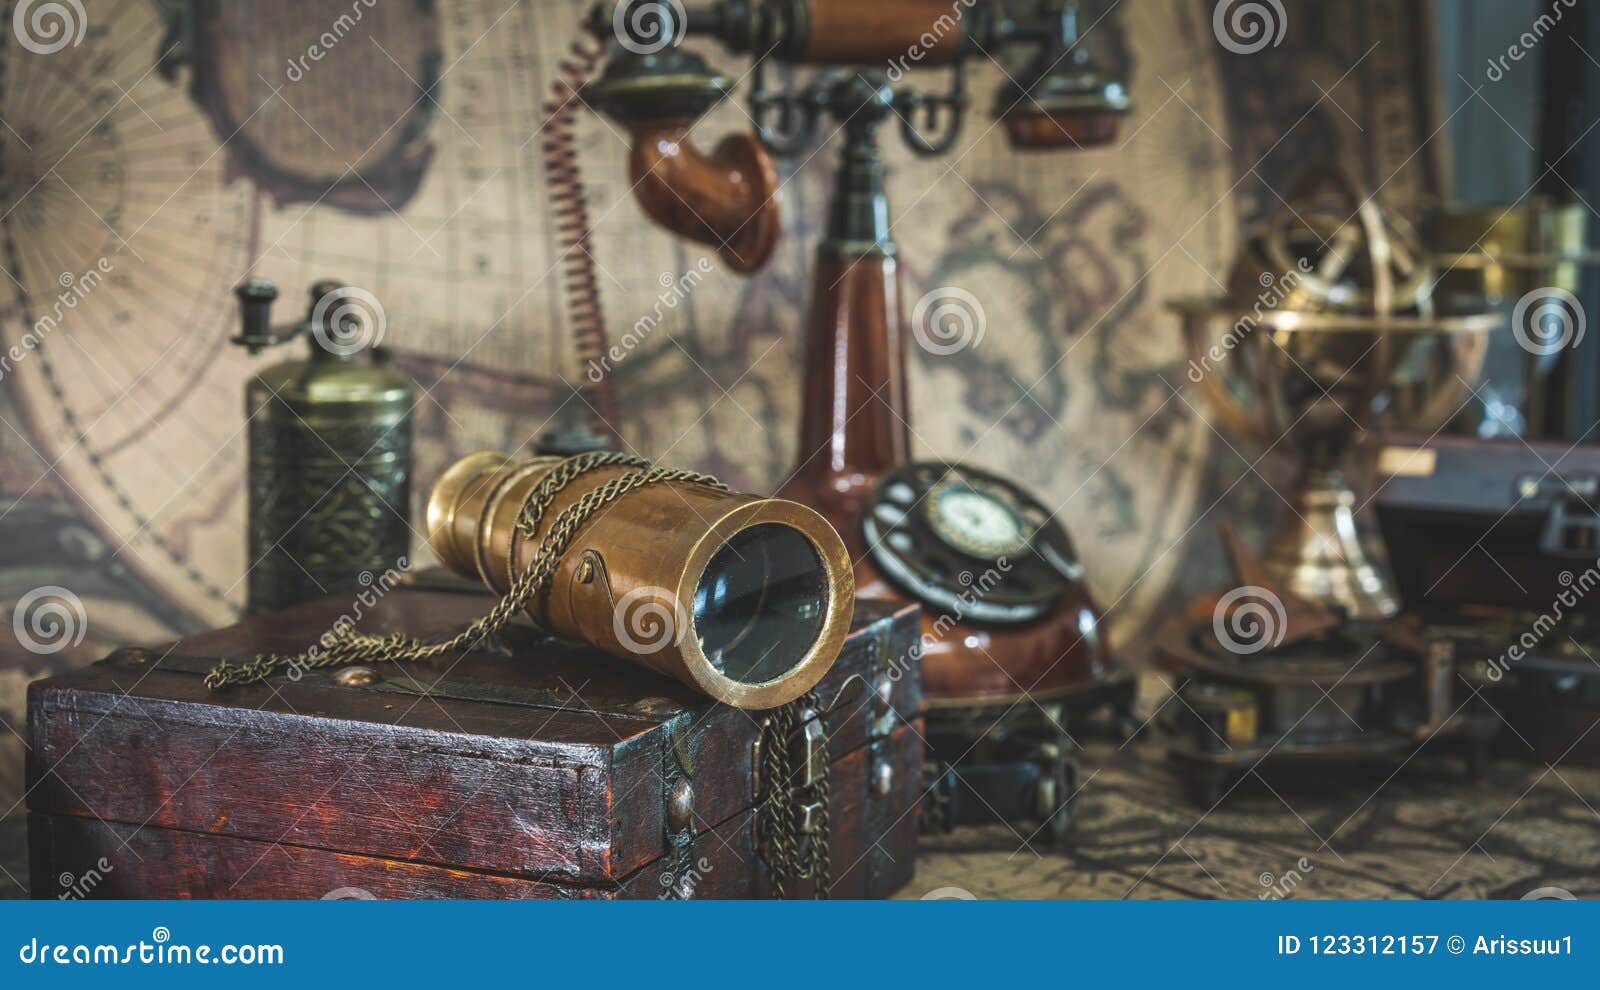 https://thumbs.dreamstime.com/z/vintage-telescope-wooden-treasure-telephone-nautical-brass-zodiac-sign-old-pirate-collection-vintage-telescope-old-pirate-123312157.jpg